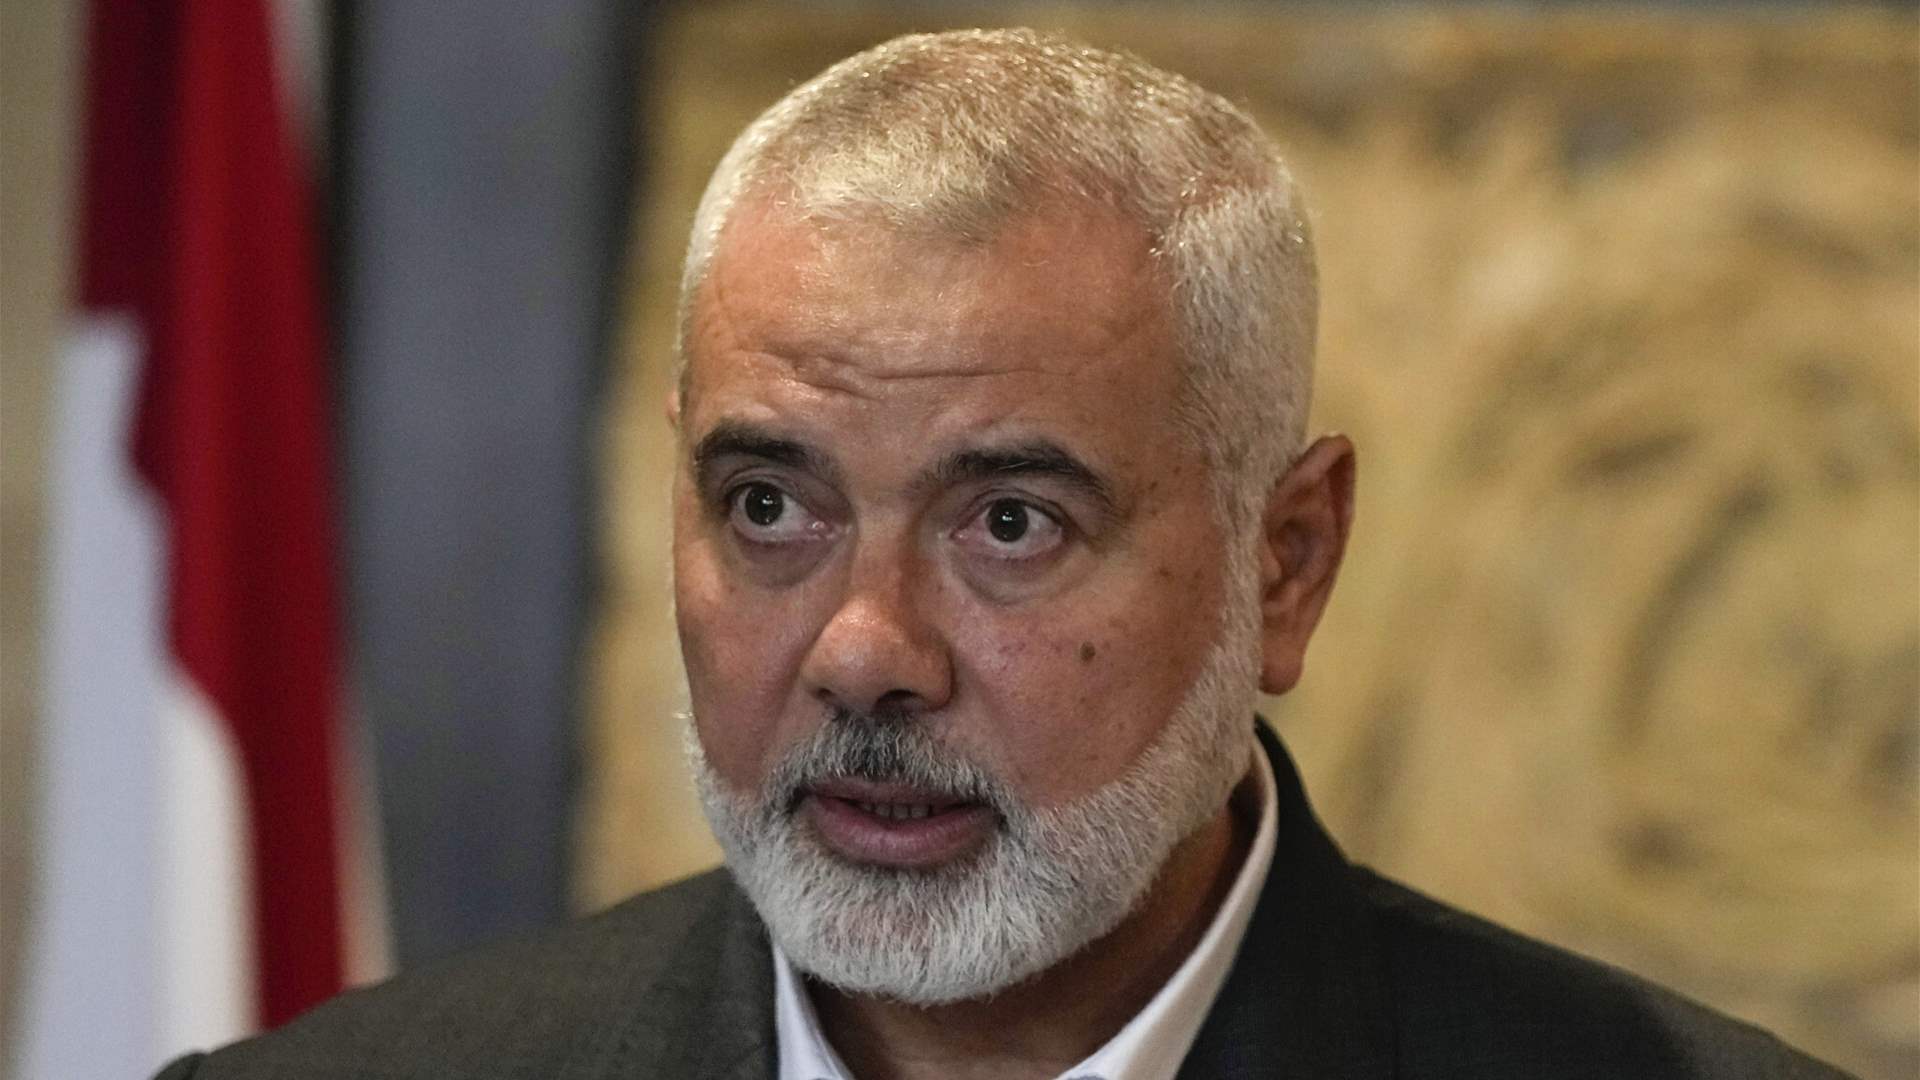 German FM calls for restraint to calm conflict after Haniyeh&#39;s killing